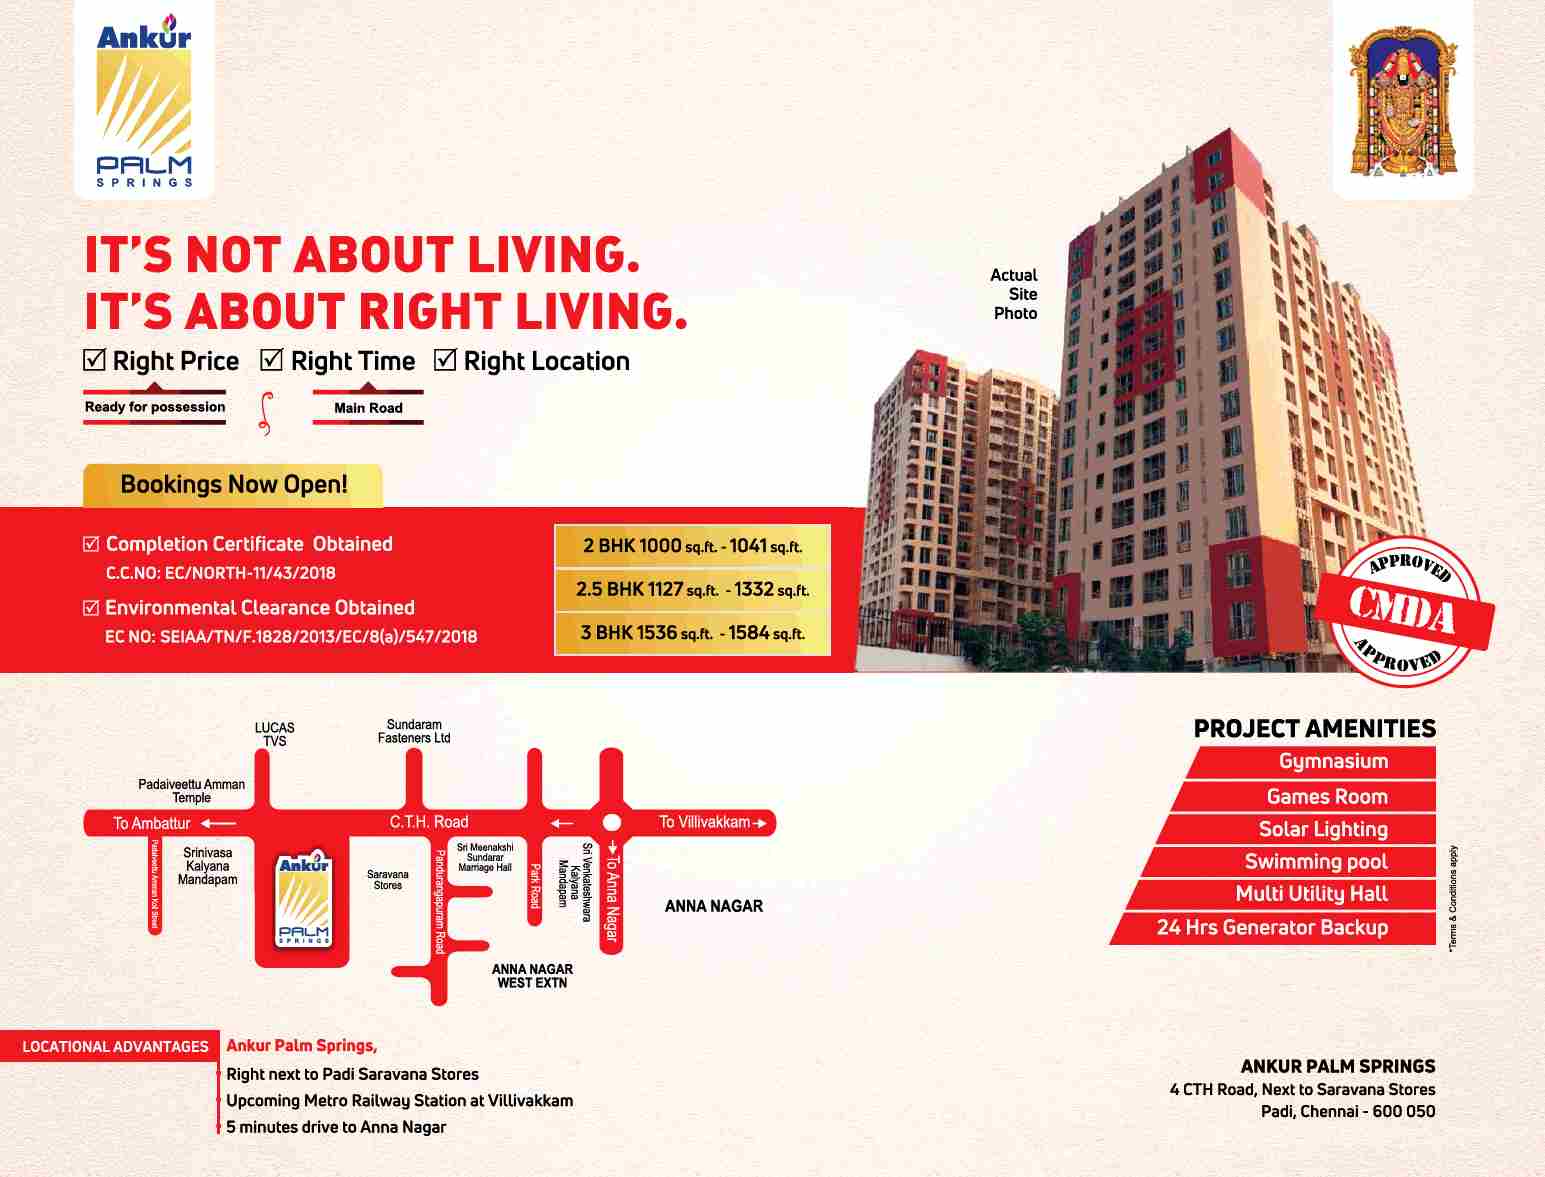 Book ready possession homes at Ankur Palm Springs in Chennai Update